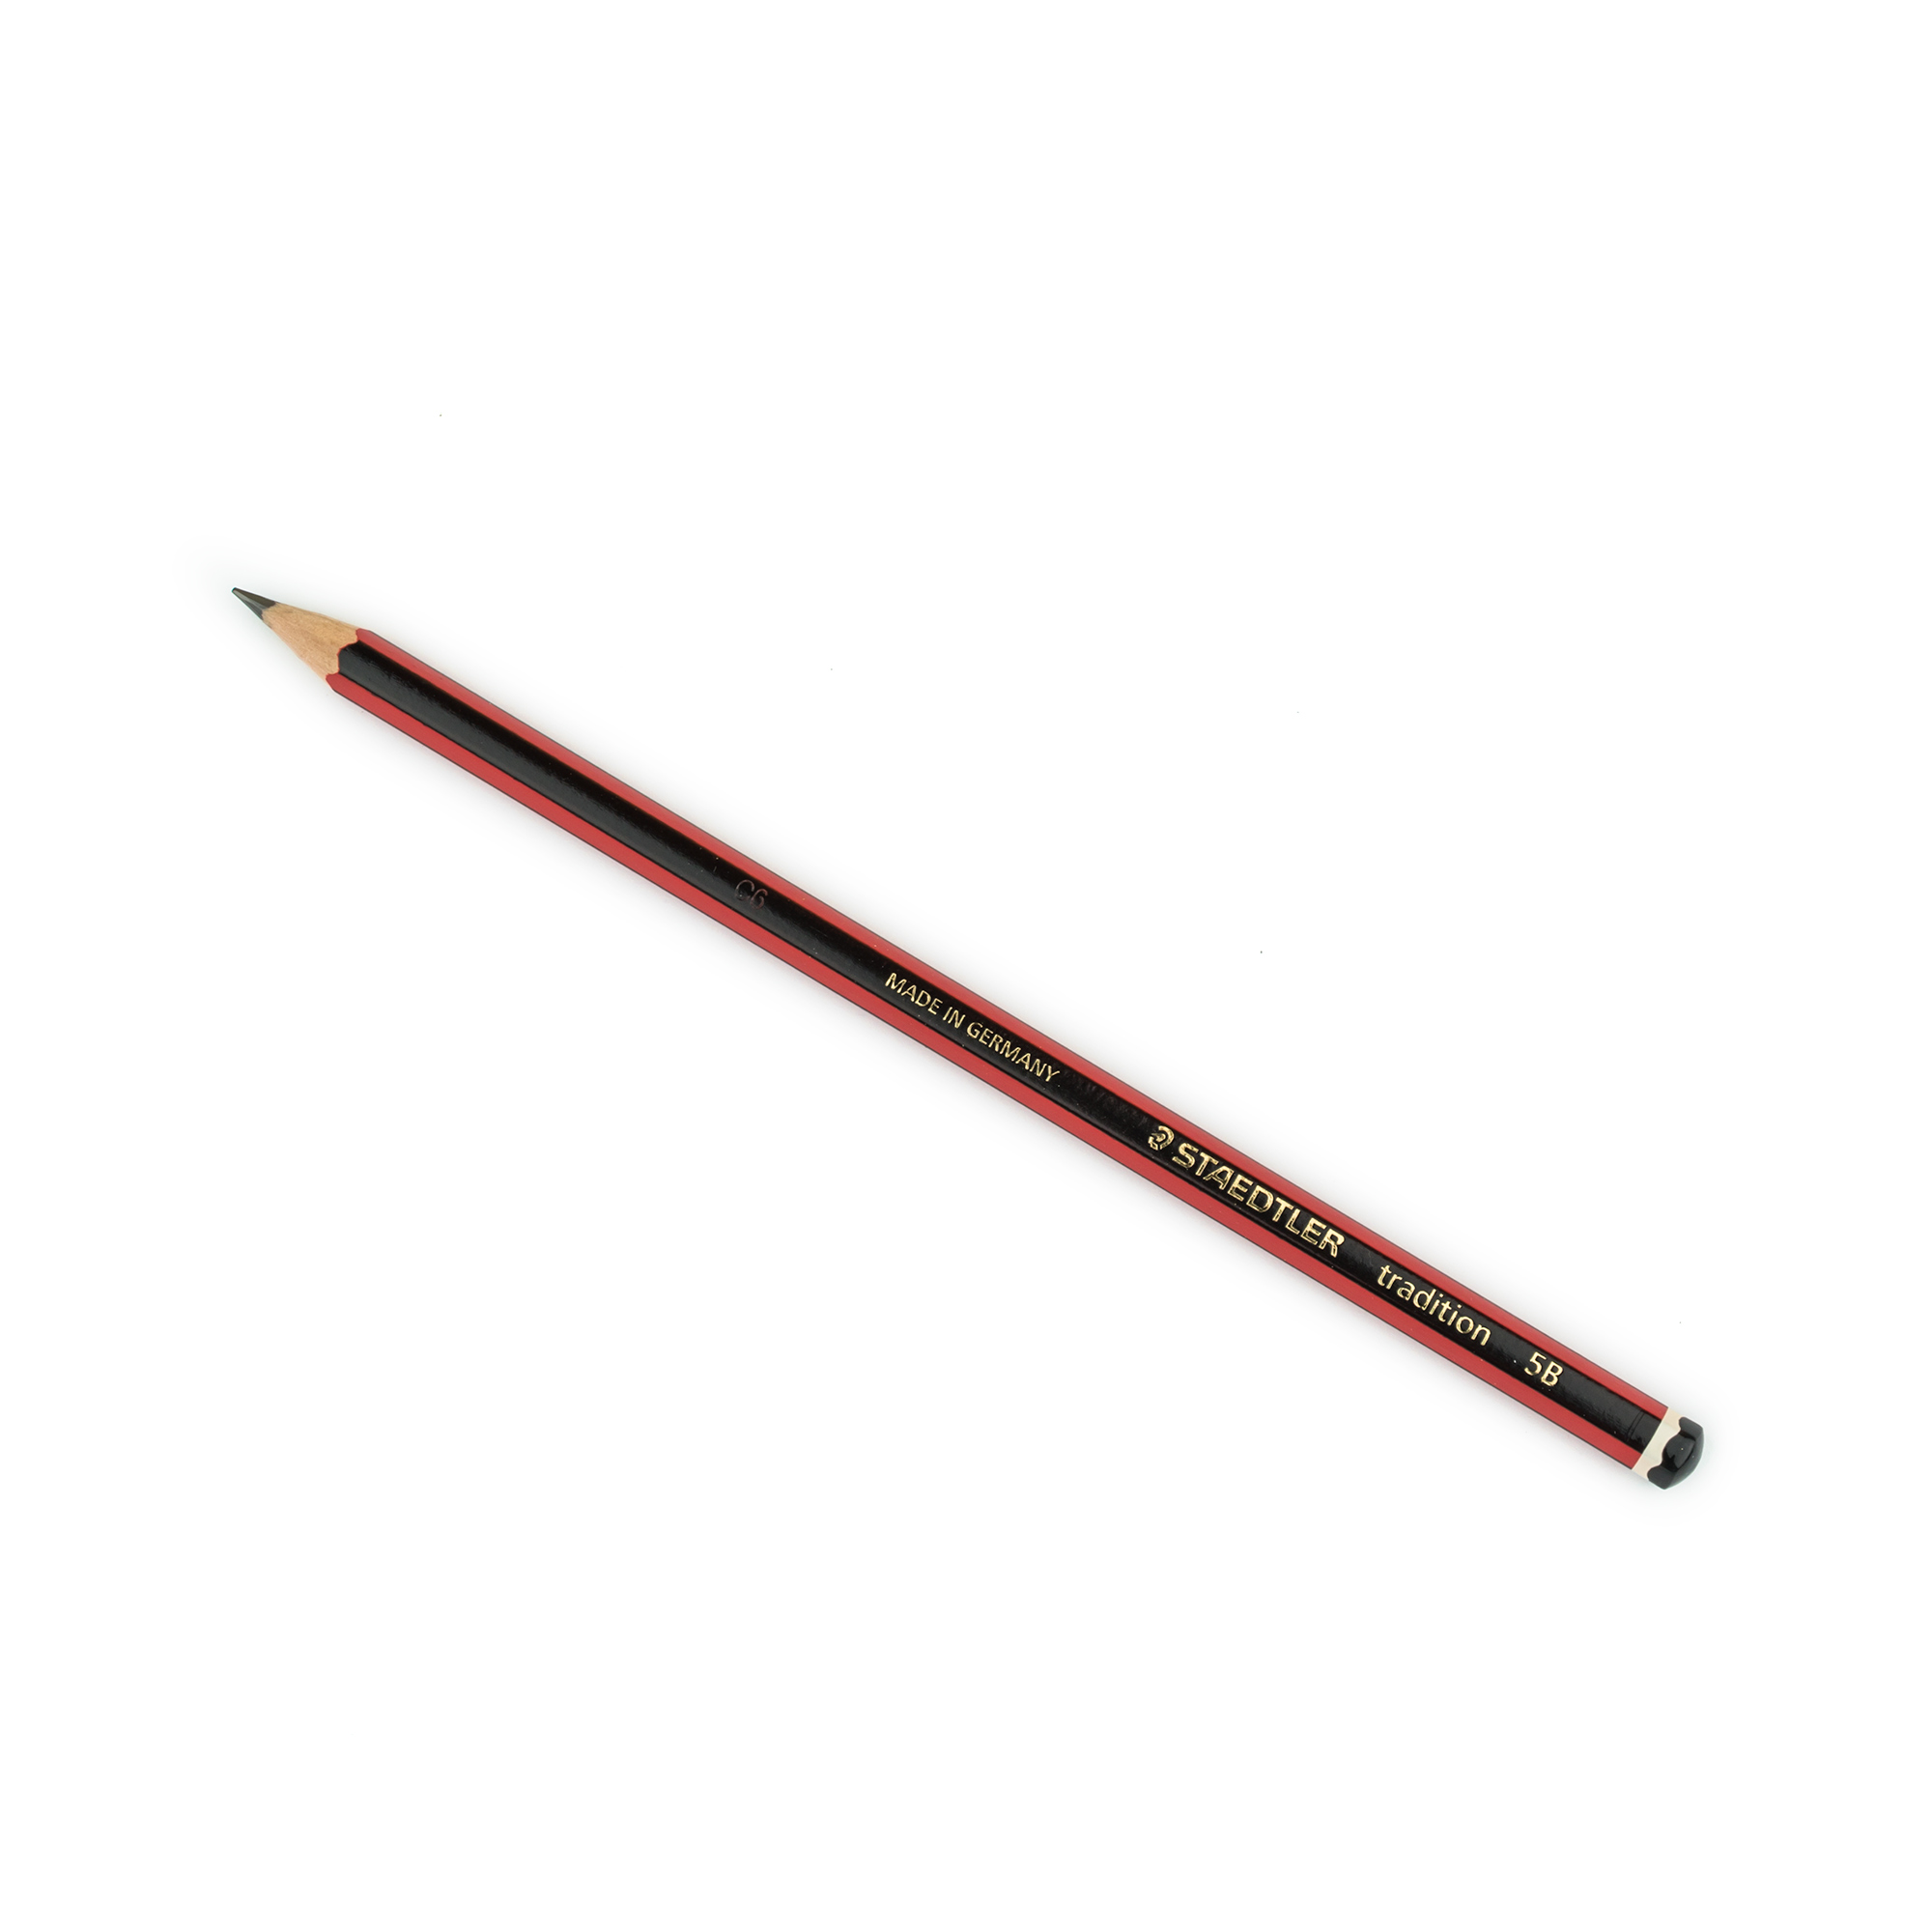 STAEDTLER 5B TRADITION PENCIL